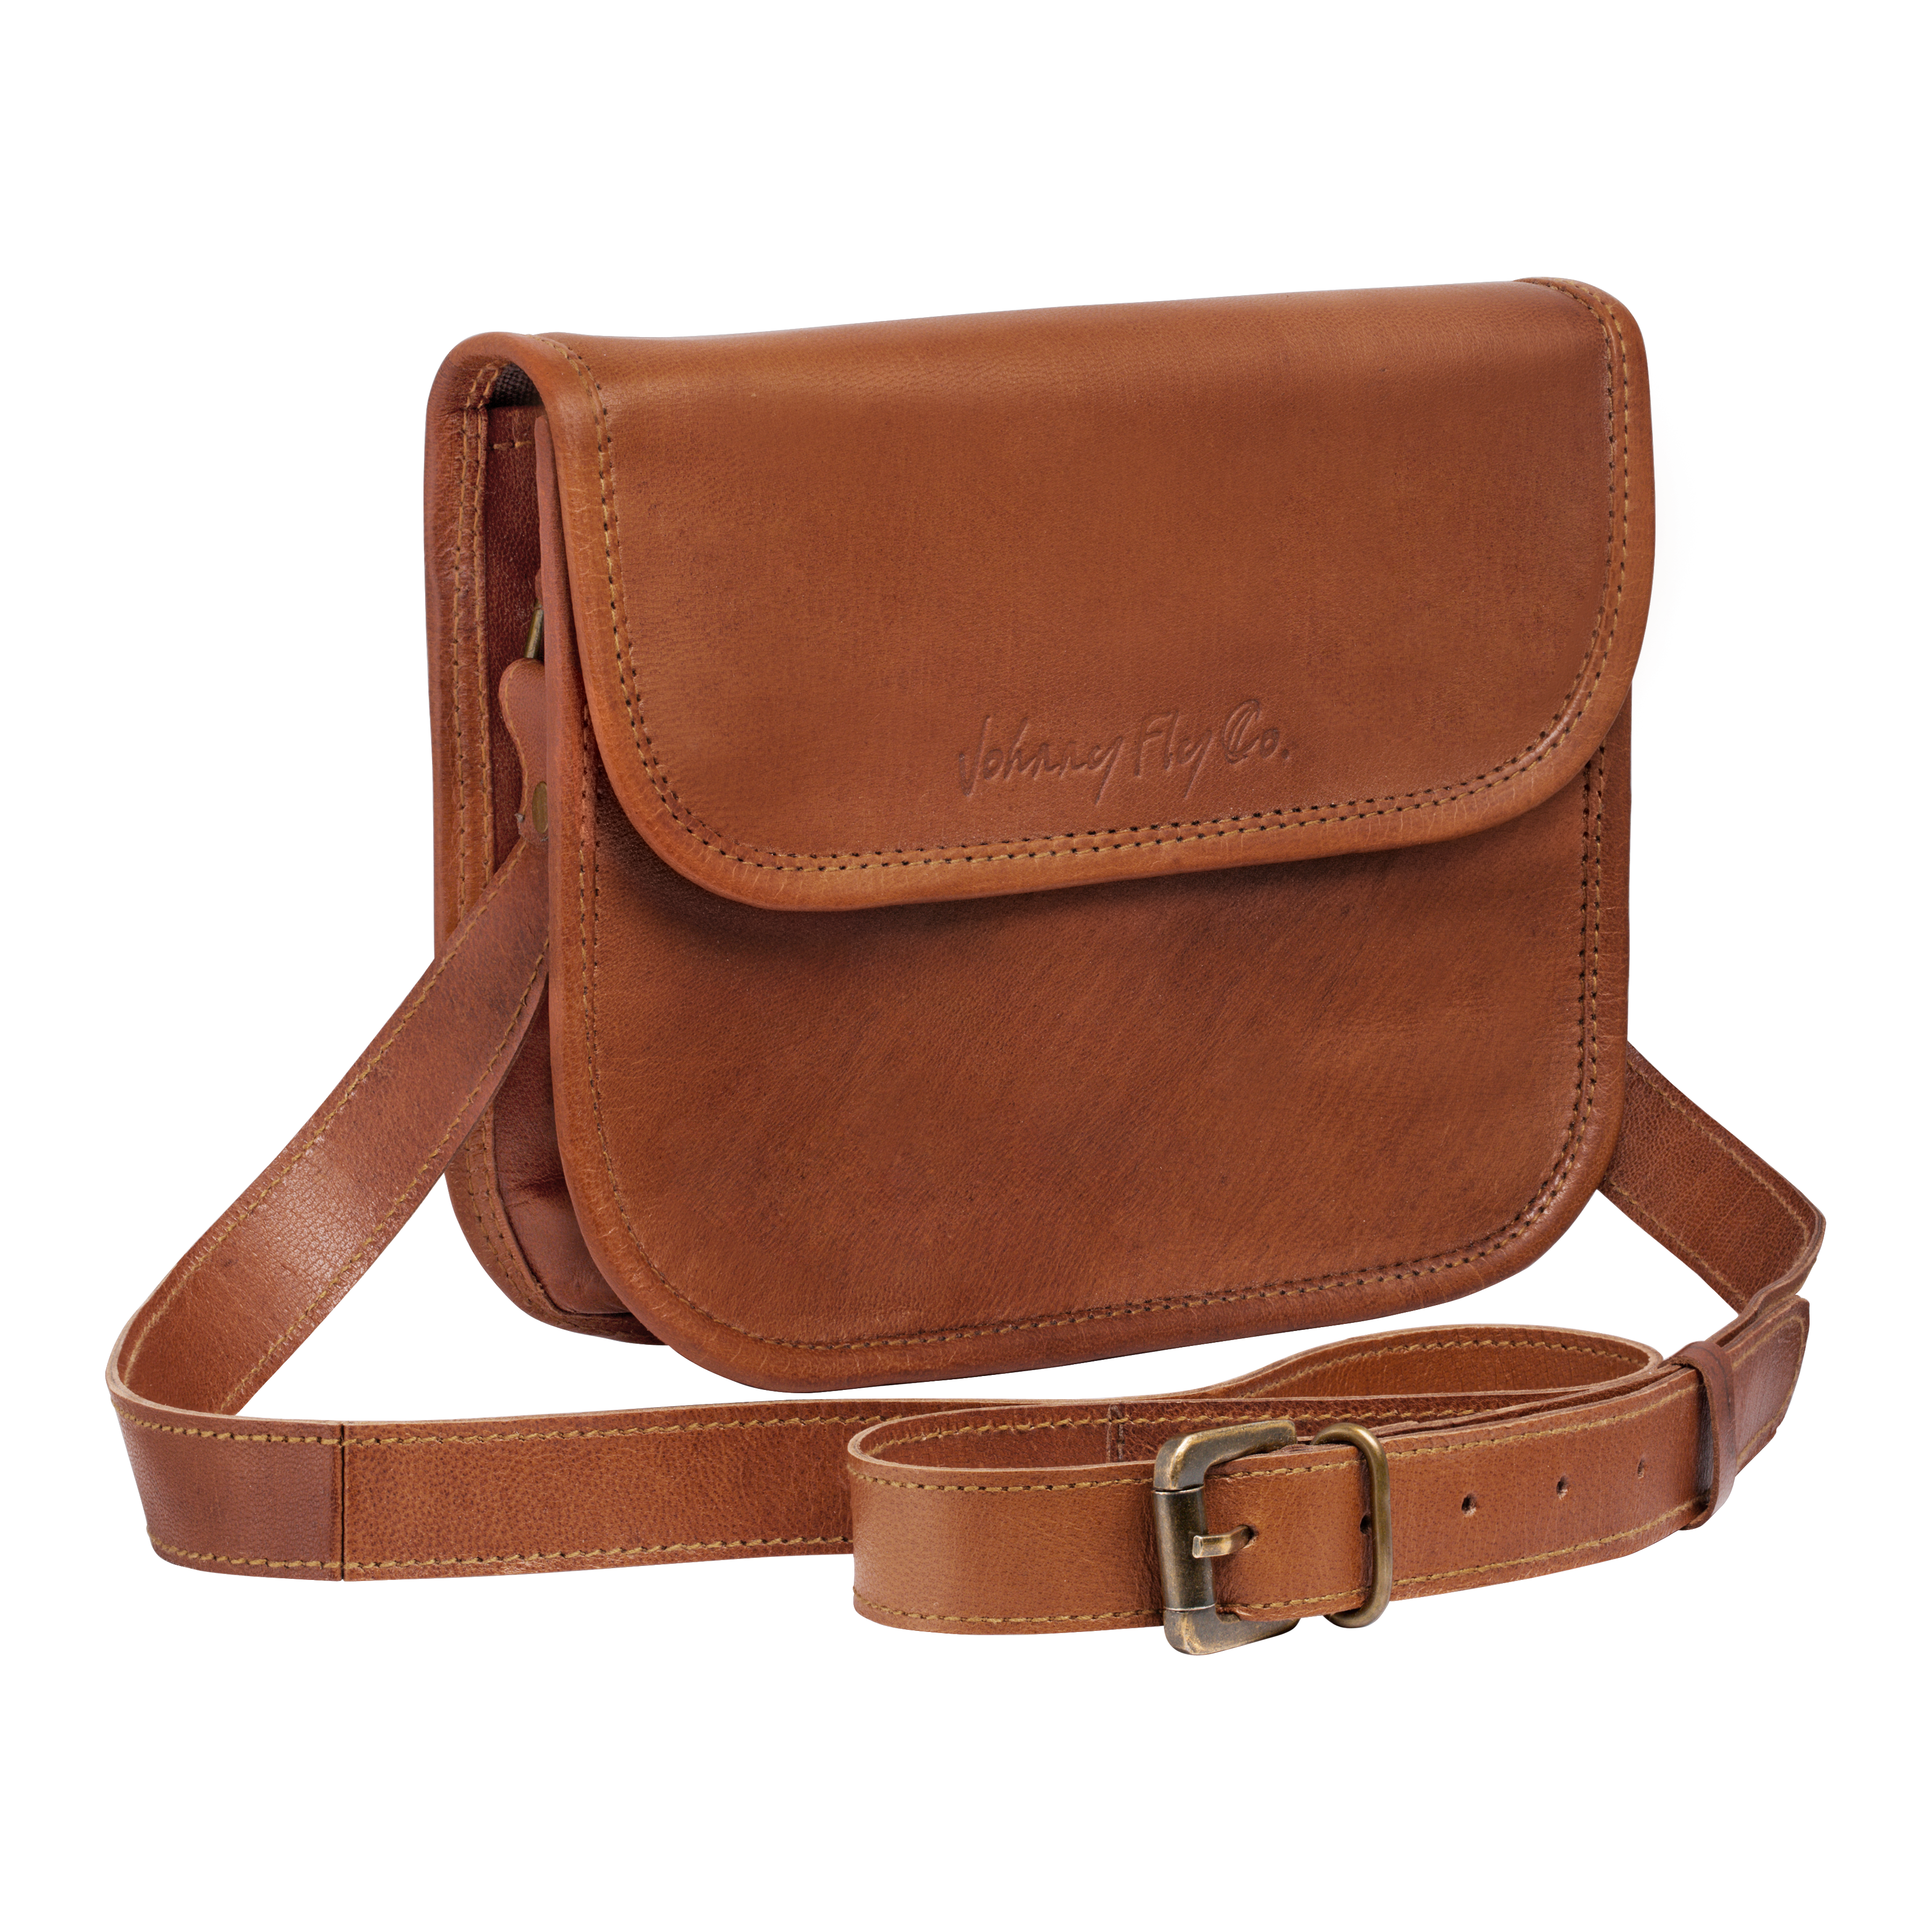 Double UtIlity Sling Bag - Johnny Fly - Leather Bags